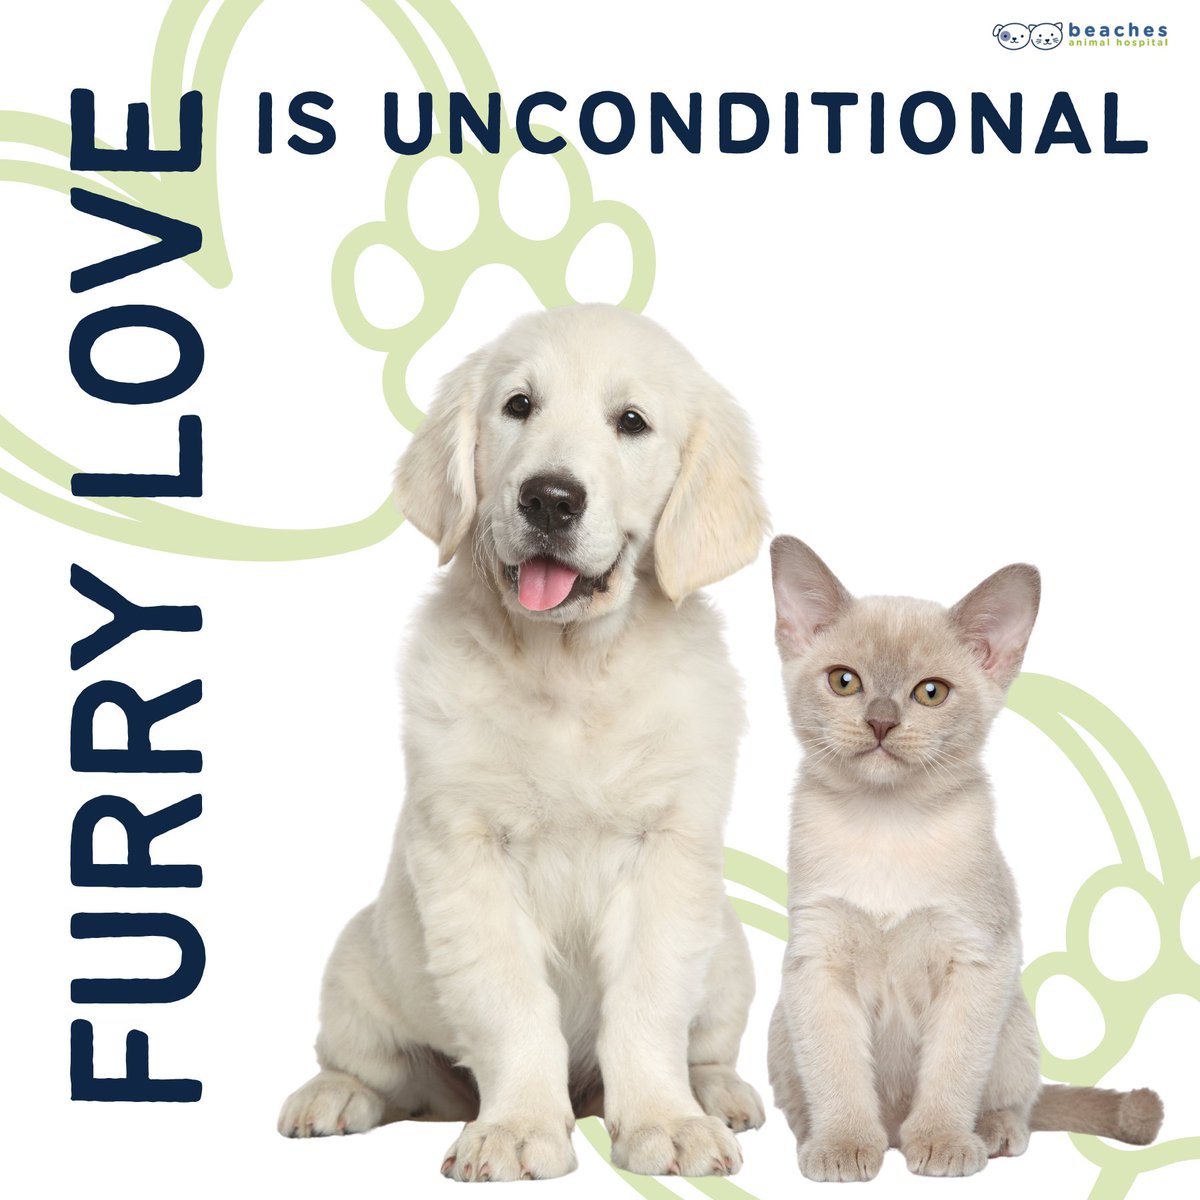 They say a pet's love knows no bounds, and we couldn't agree more! 🐶 From the wag of their tail to the purr of their contentment, our furry friends have mastered the art of unconditional love.

#love #instagood #cute #pet #petstagram #photooftheday #instamood #adorable #instapet